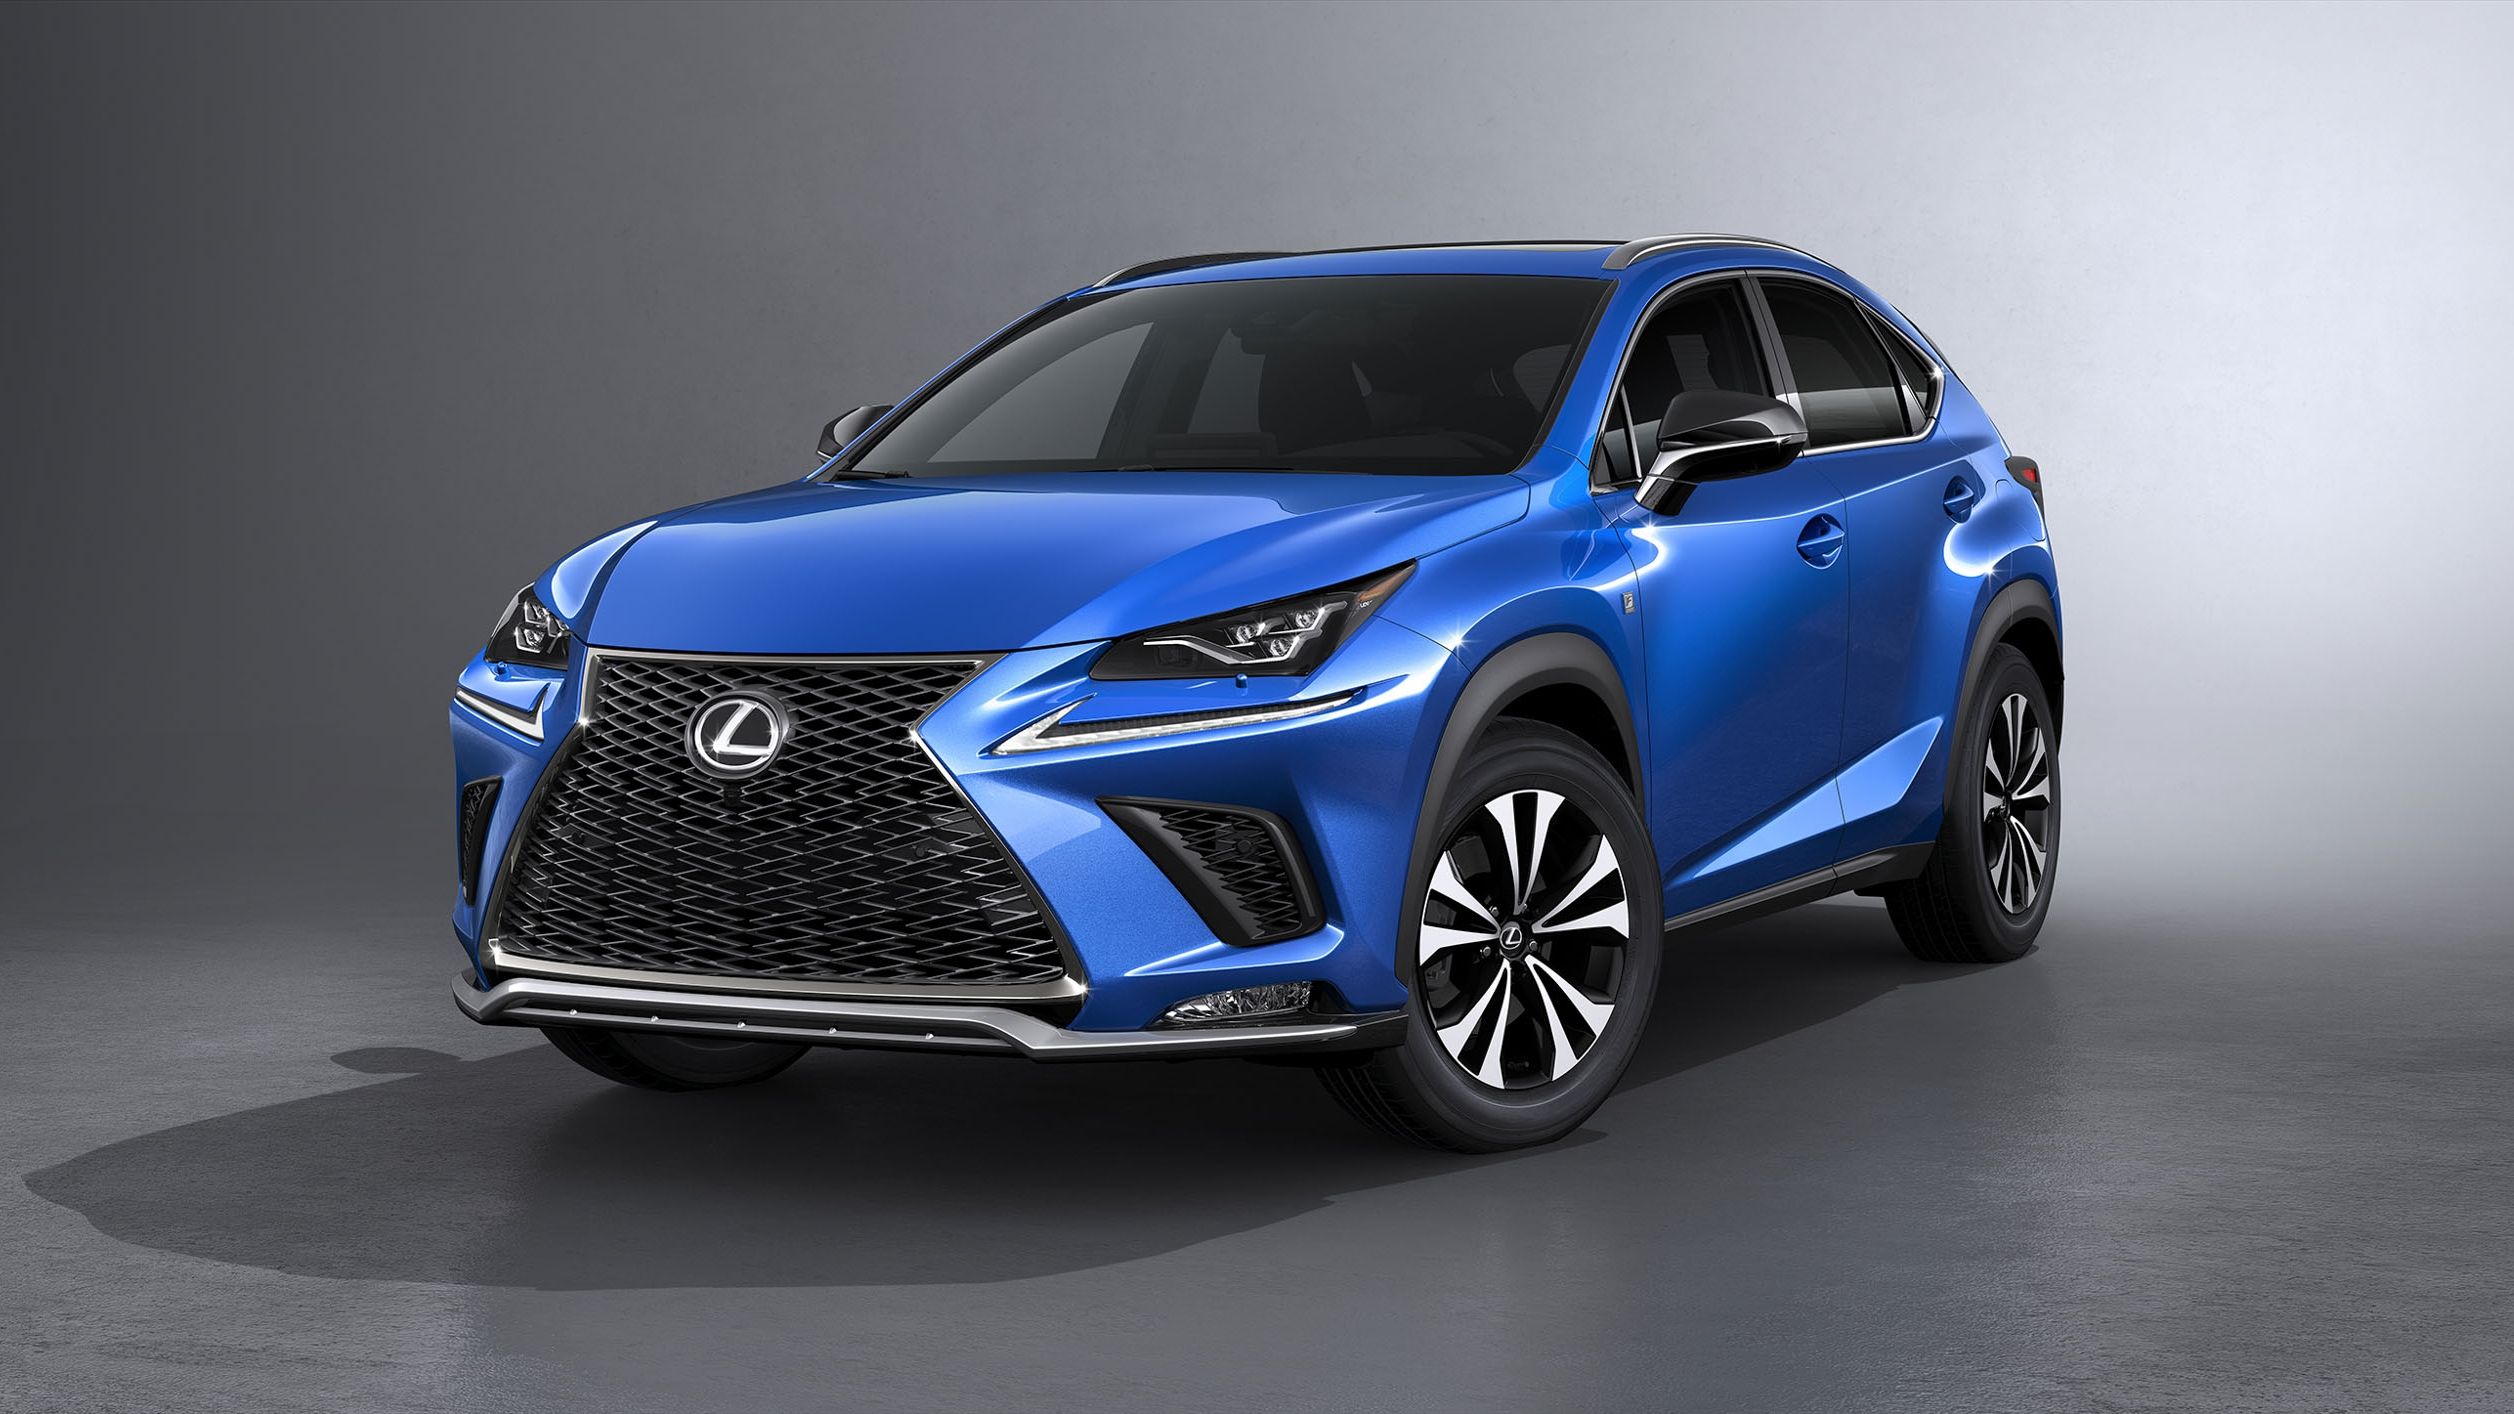 2017 The Lexus NX Stunts on the Competition in Shanghai With a New Look